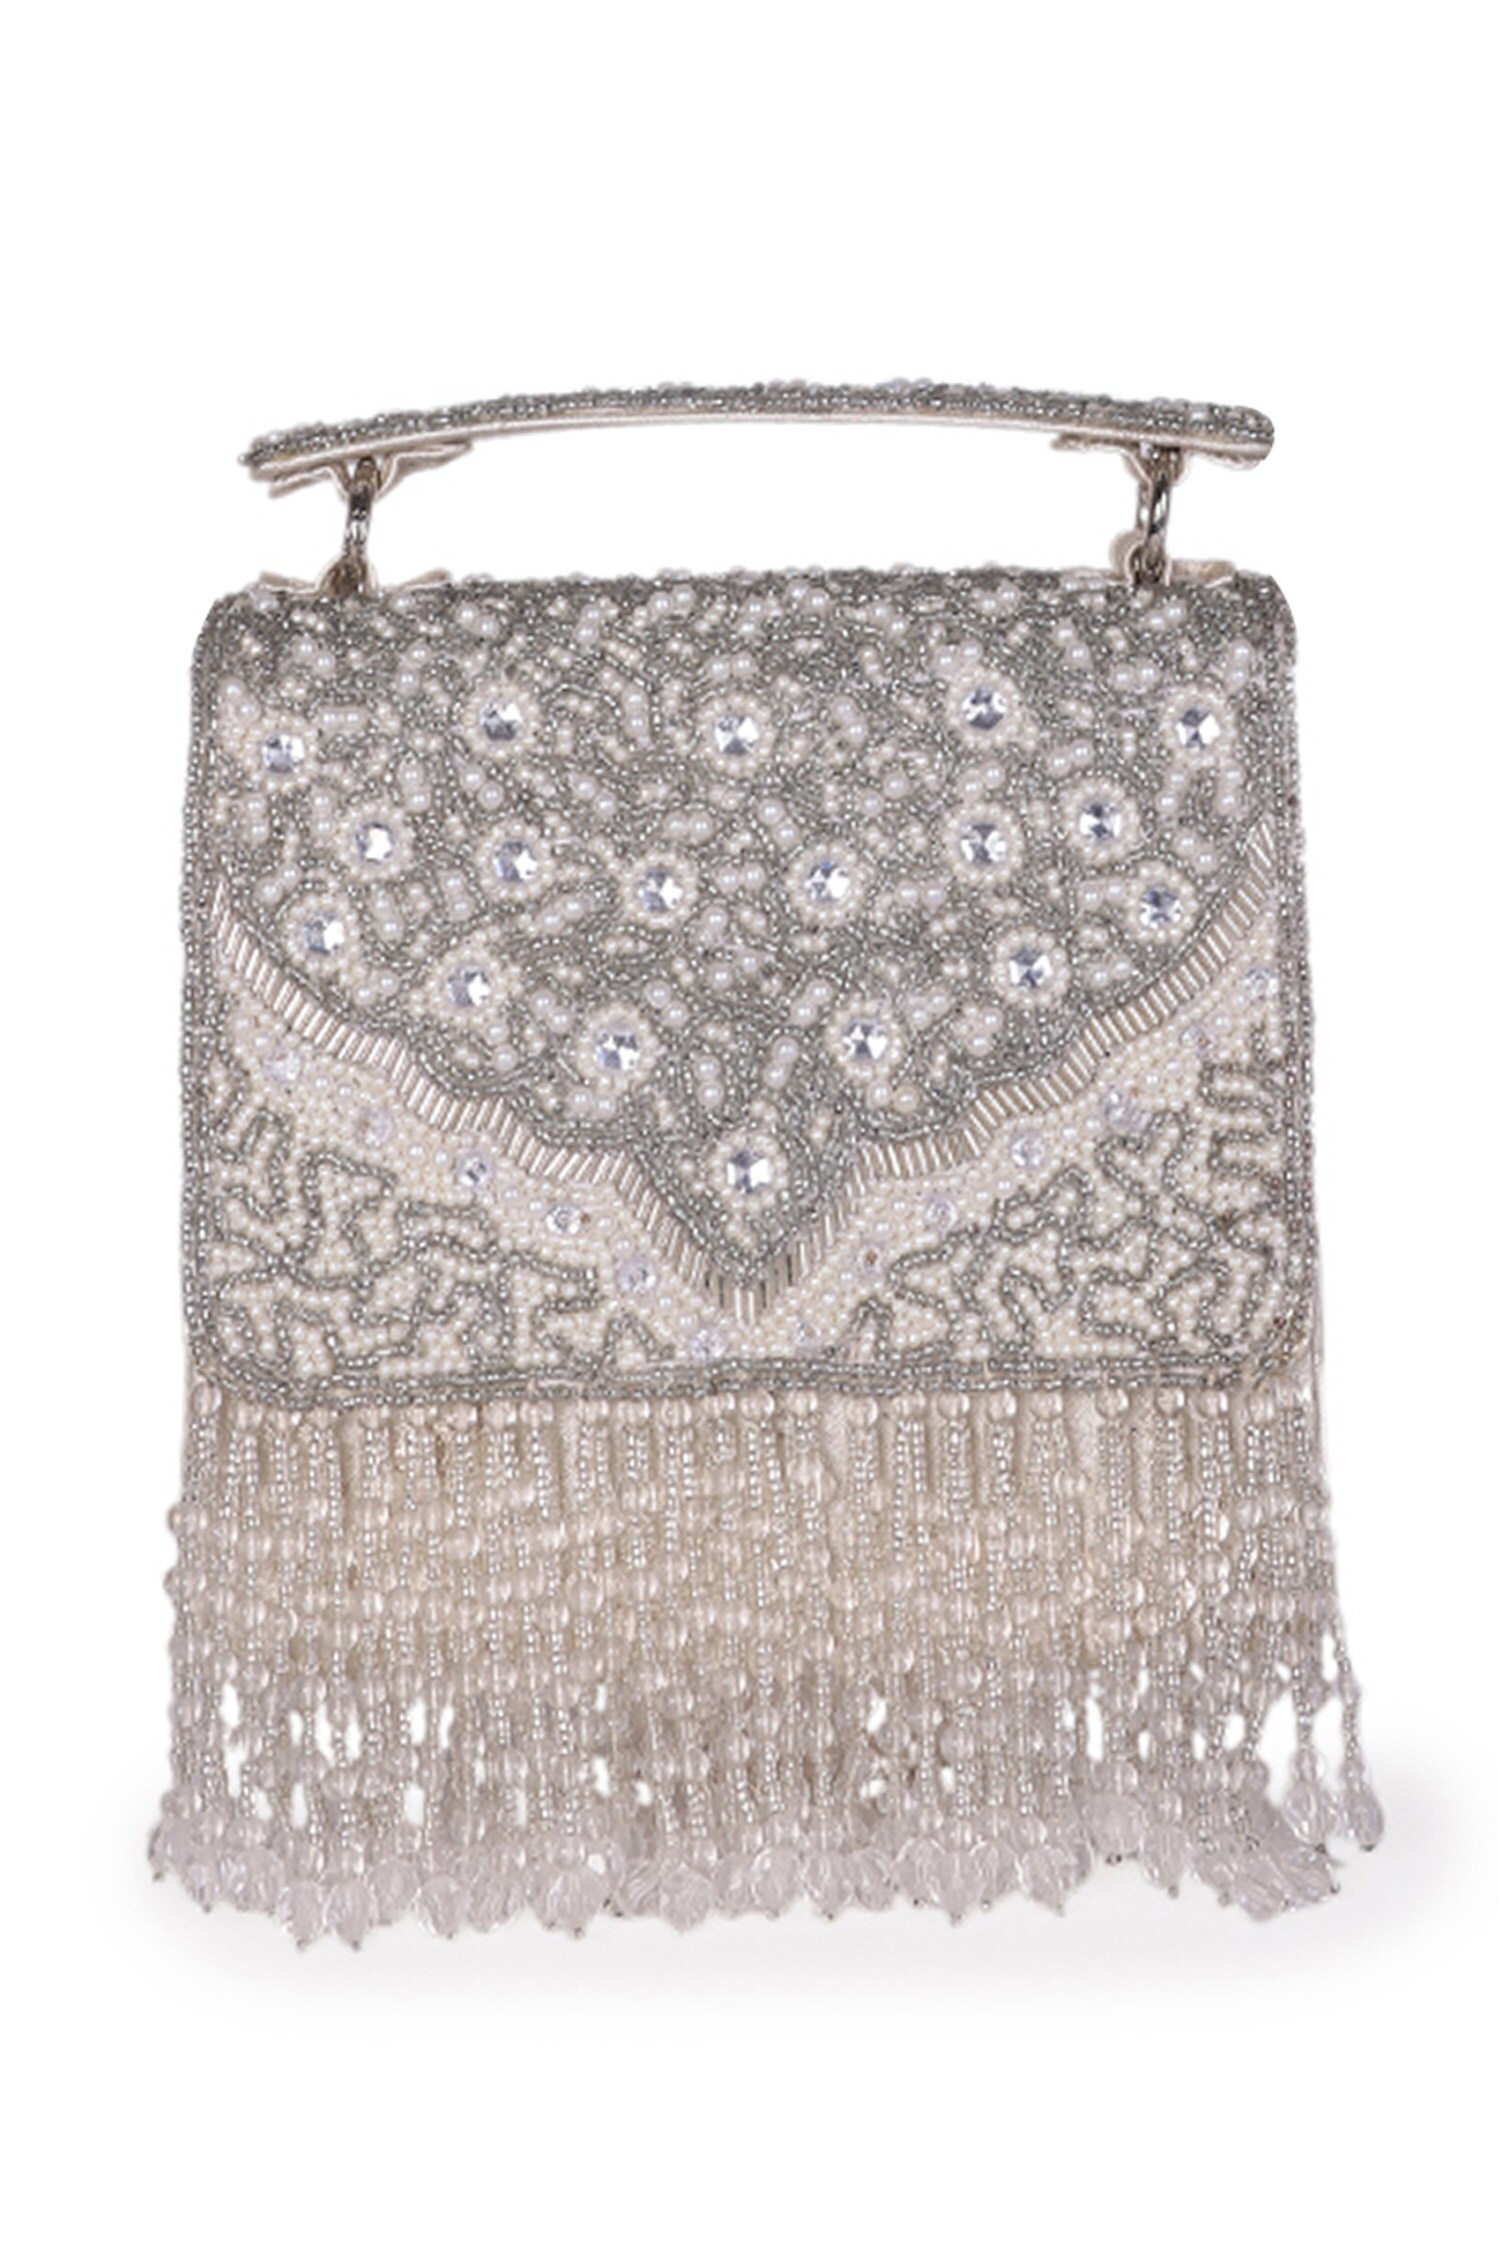 Buy Silver Embroidery Floral Clutch by 5Elements Online at Aza Fashions.